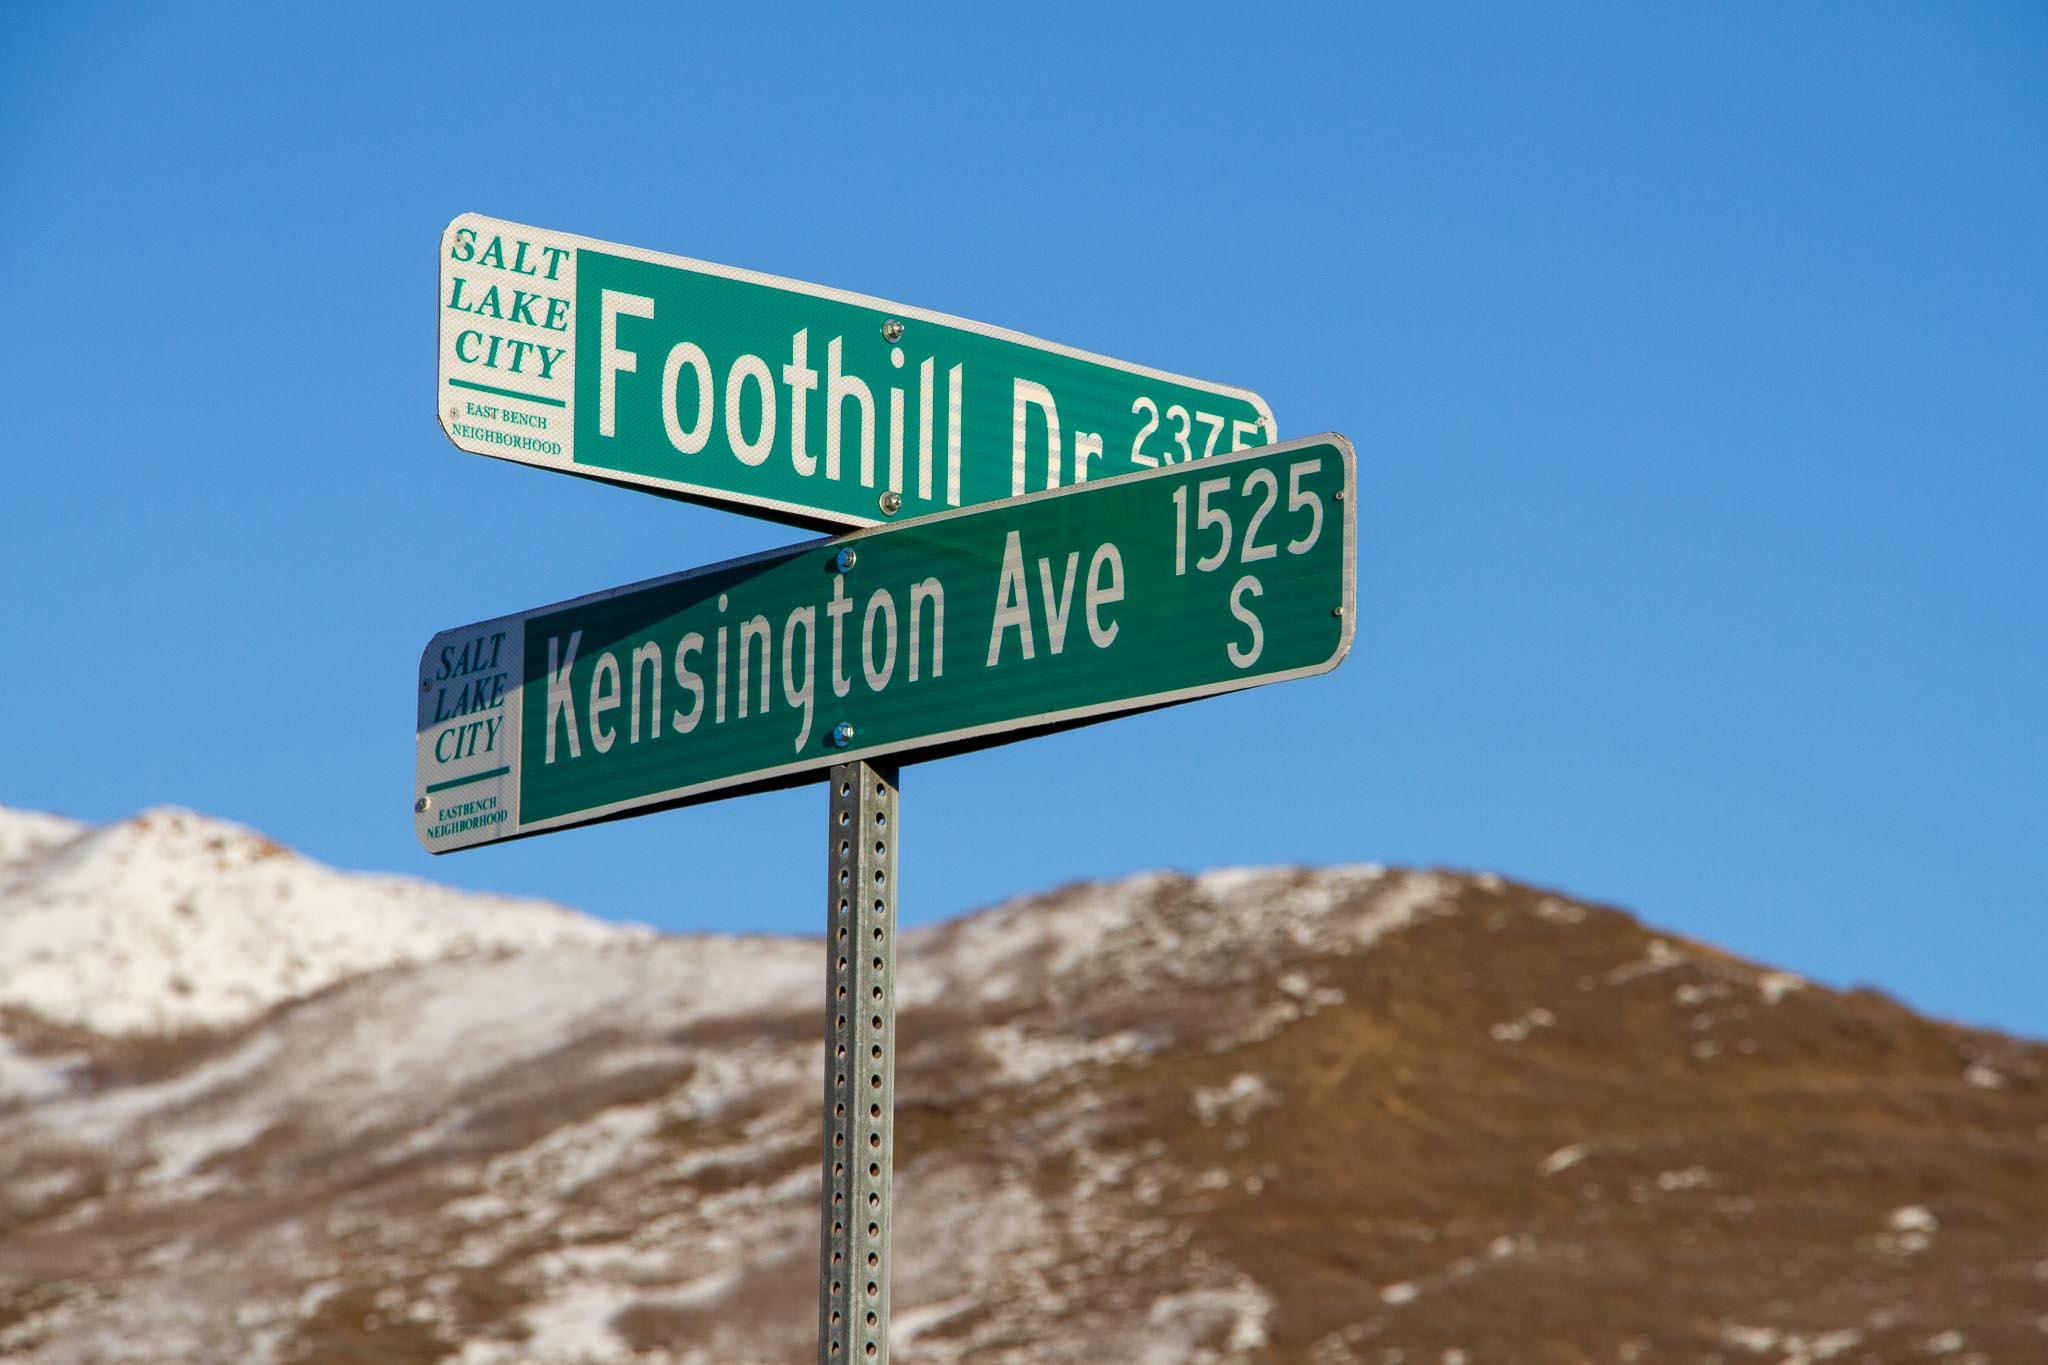 A close up picture of the street signs marking the intersection of Foothill Drive and Kensington Avenue.